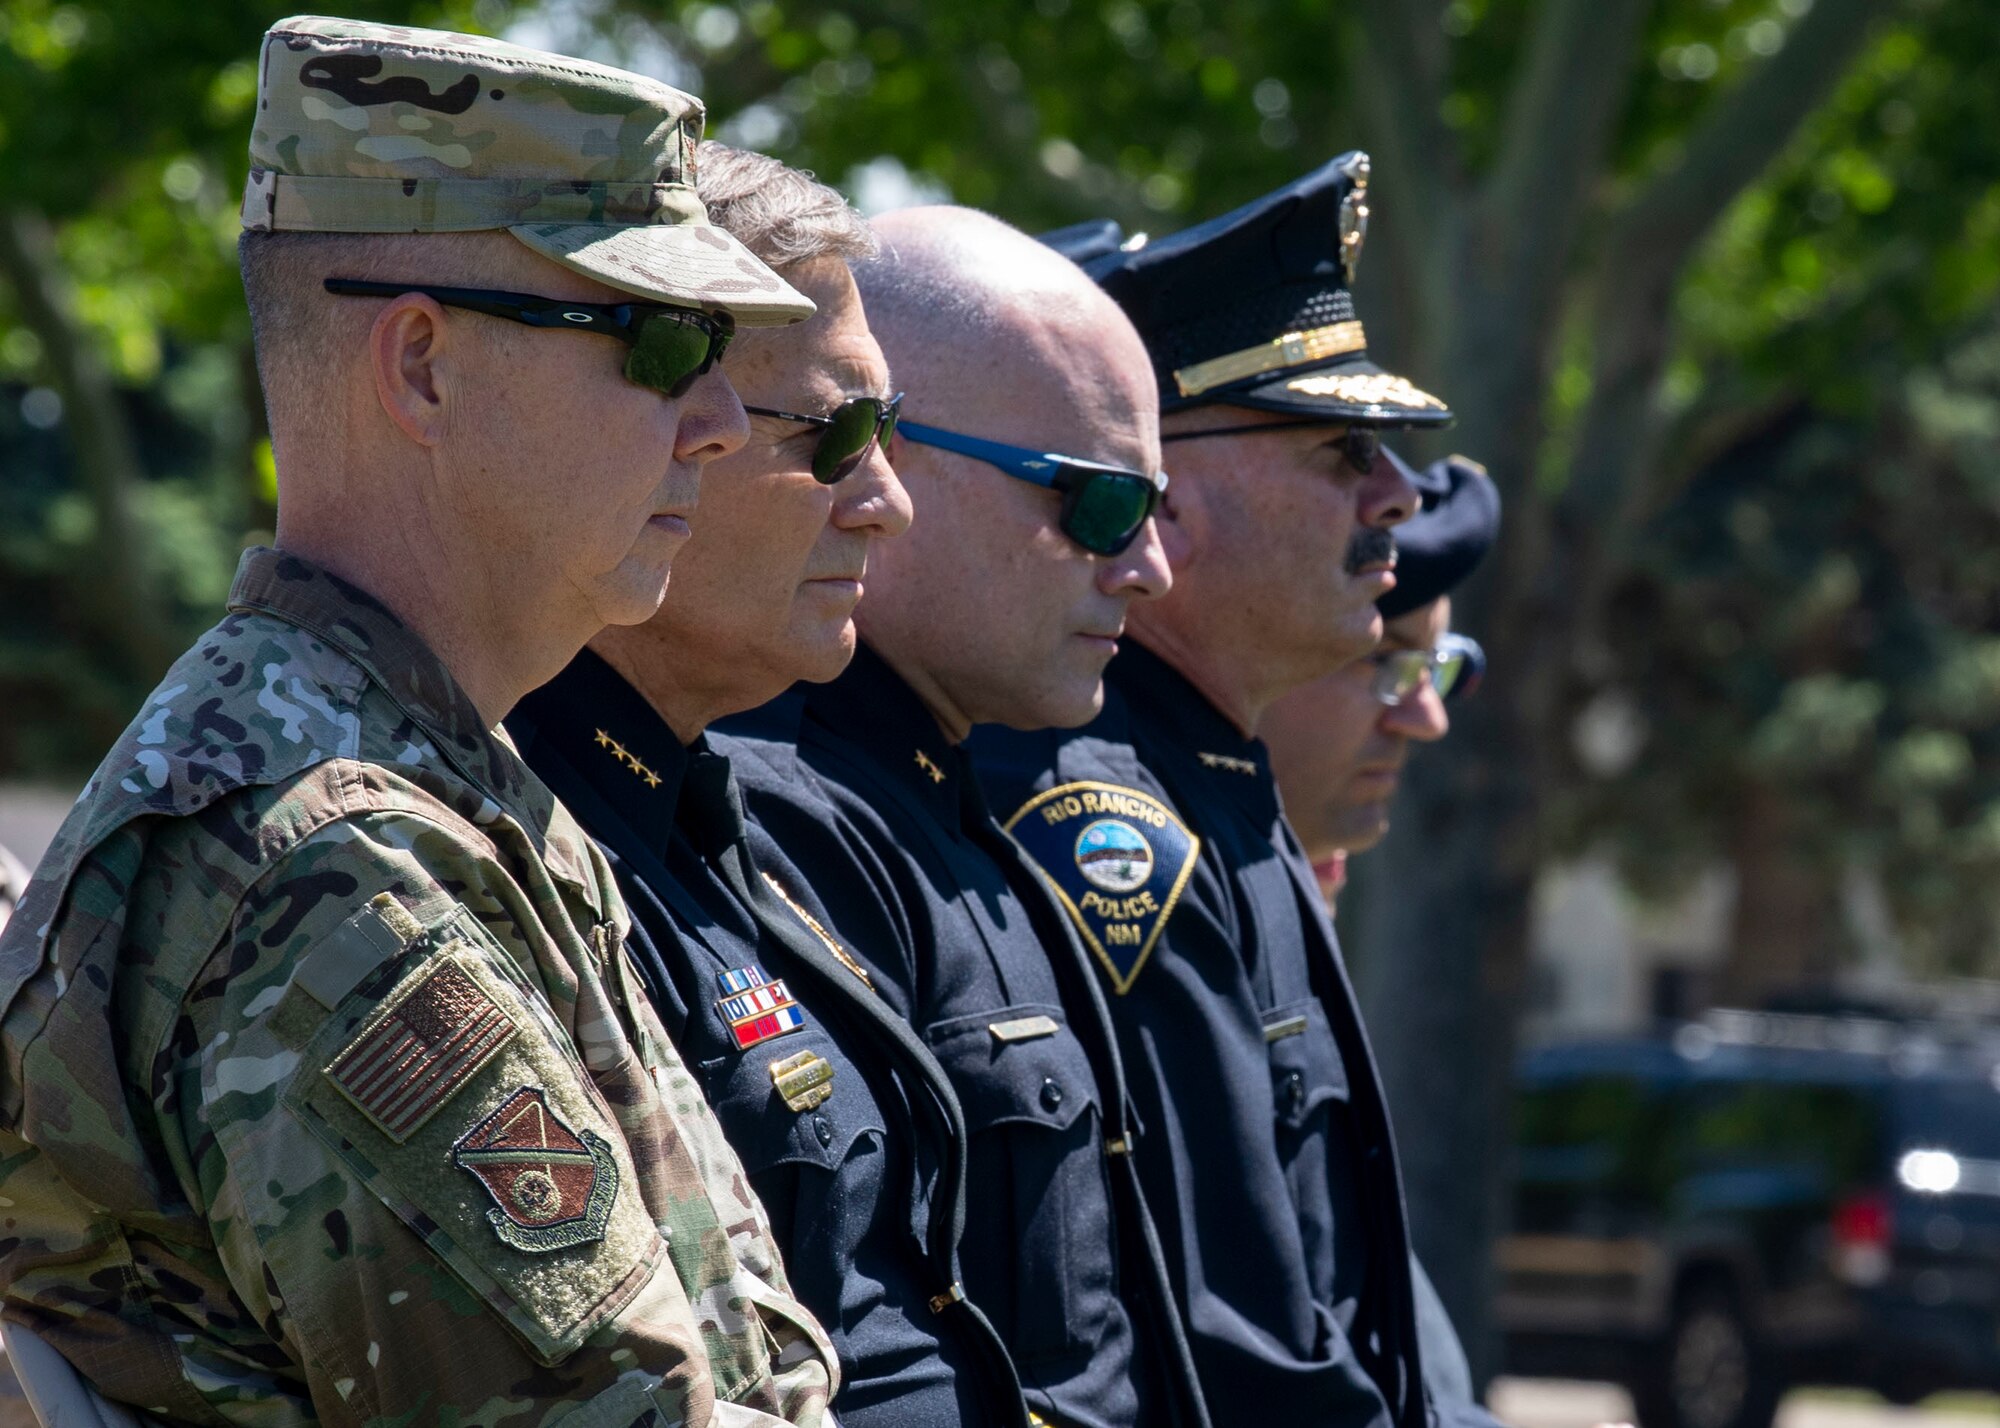 377th Air Base Wing commander, Col. Richard Gibbs sits with New Mexico law enforcement leadership during the Police Week Memorial Retreat Ceremony at Kirtland Air Force Base, N.M., May 15. National Police Week is an annual nationwide tribute to law enforcement officers who have lost their lives in the line of duty for the safety and protection of others. National Police Week started Sunday, May 12, and ends Saturday, May 18. (U.S. Air Force photo by Staff Sgt. J.D. Strong II)